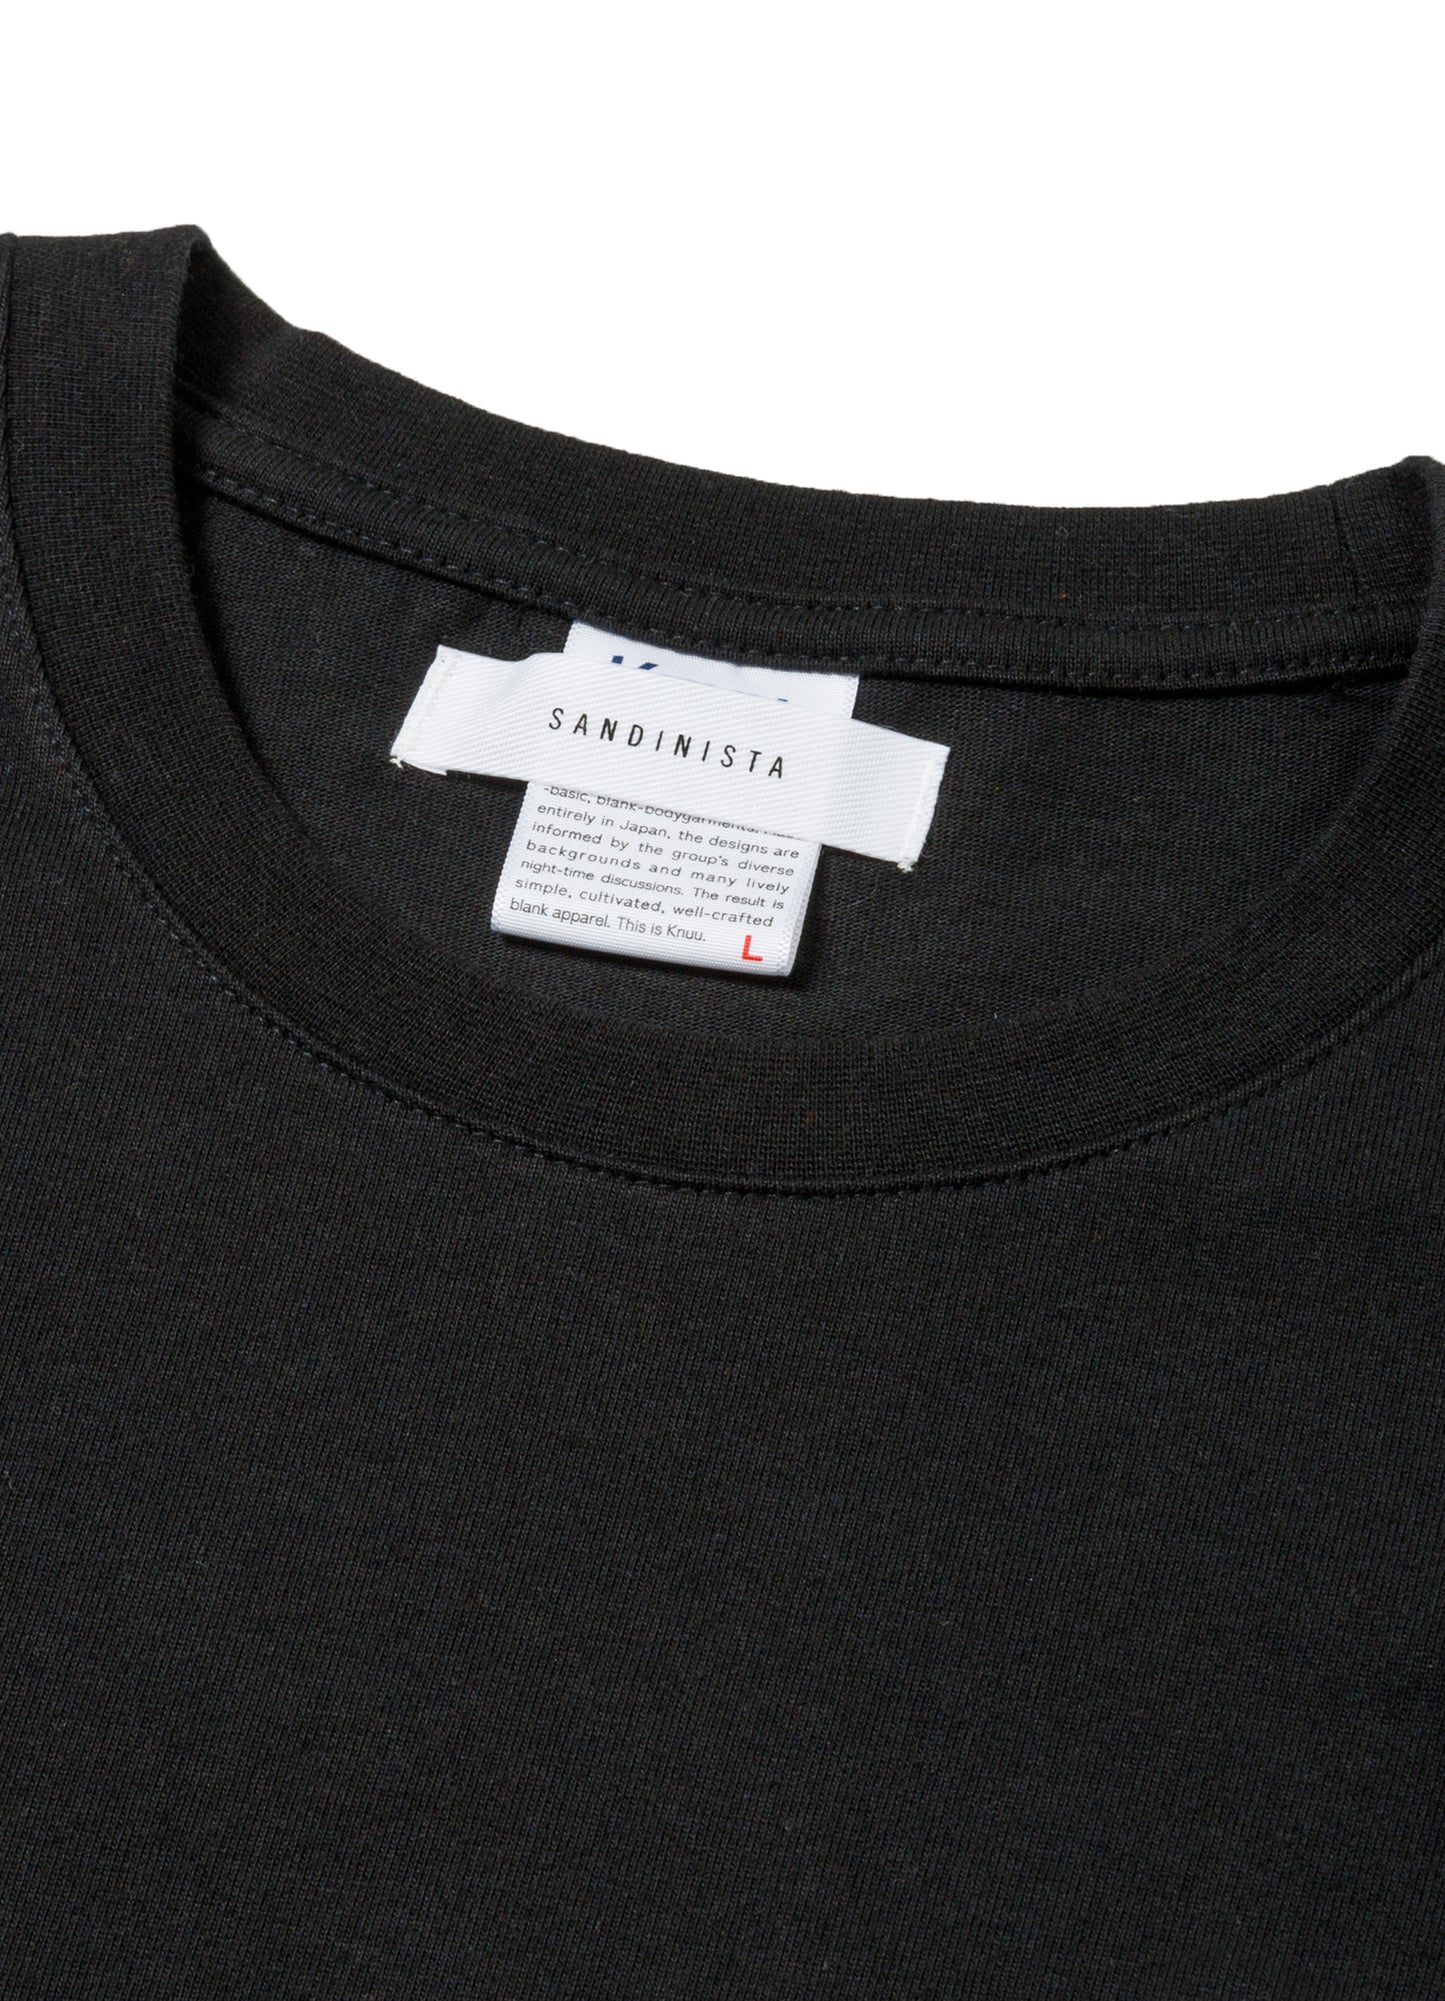 Archive 01 Tee  [KN-T-002]